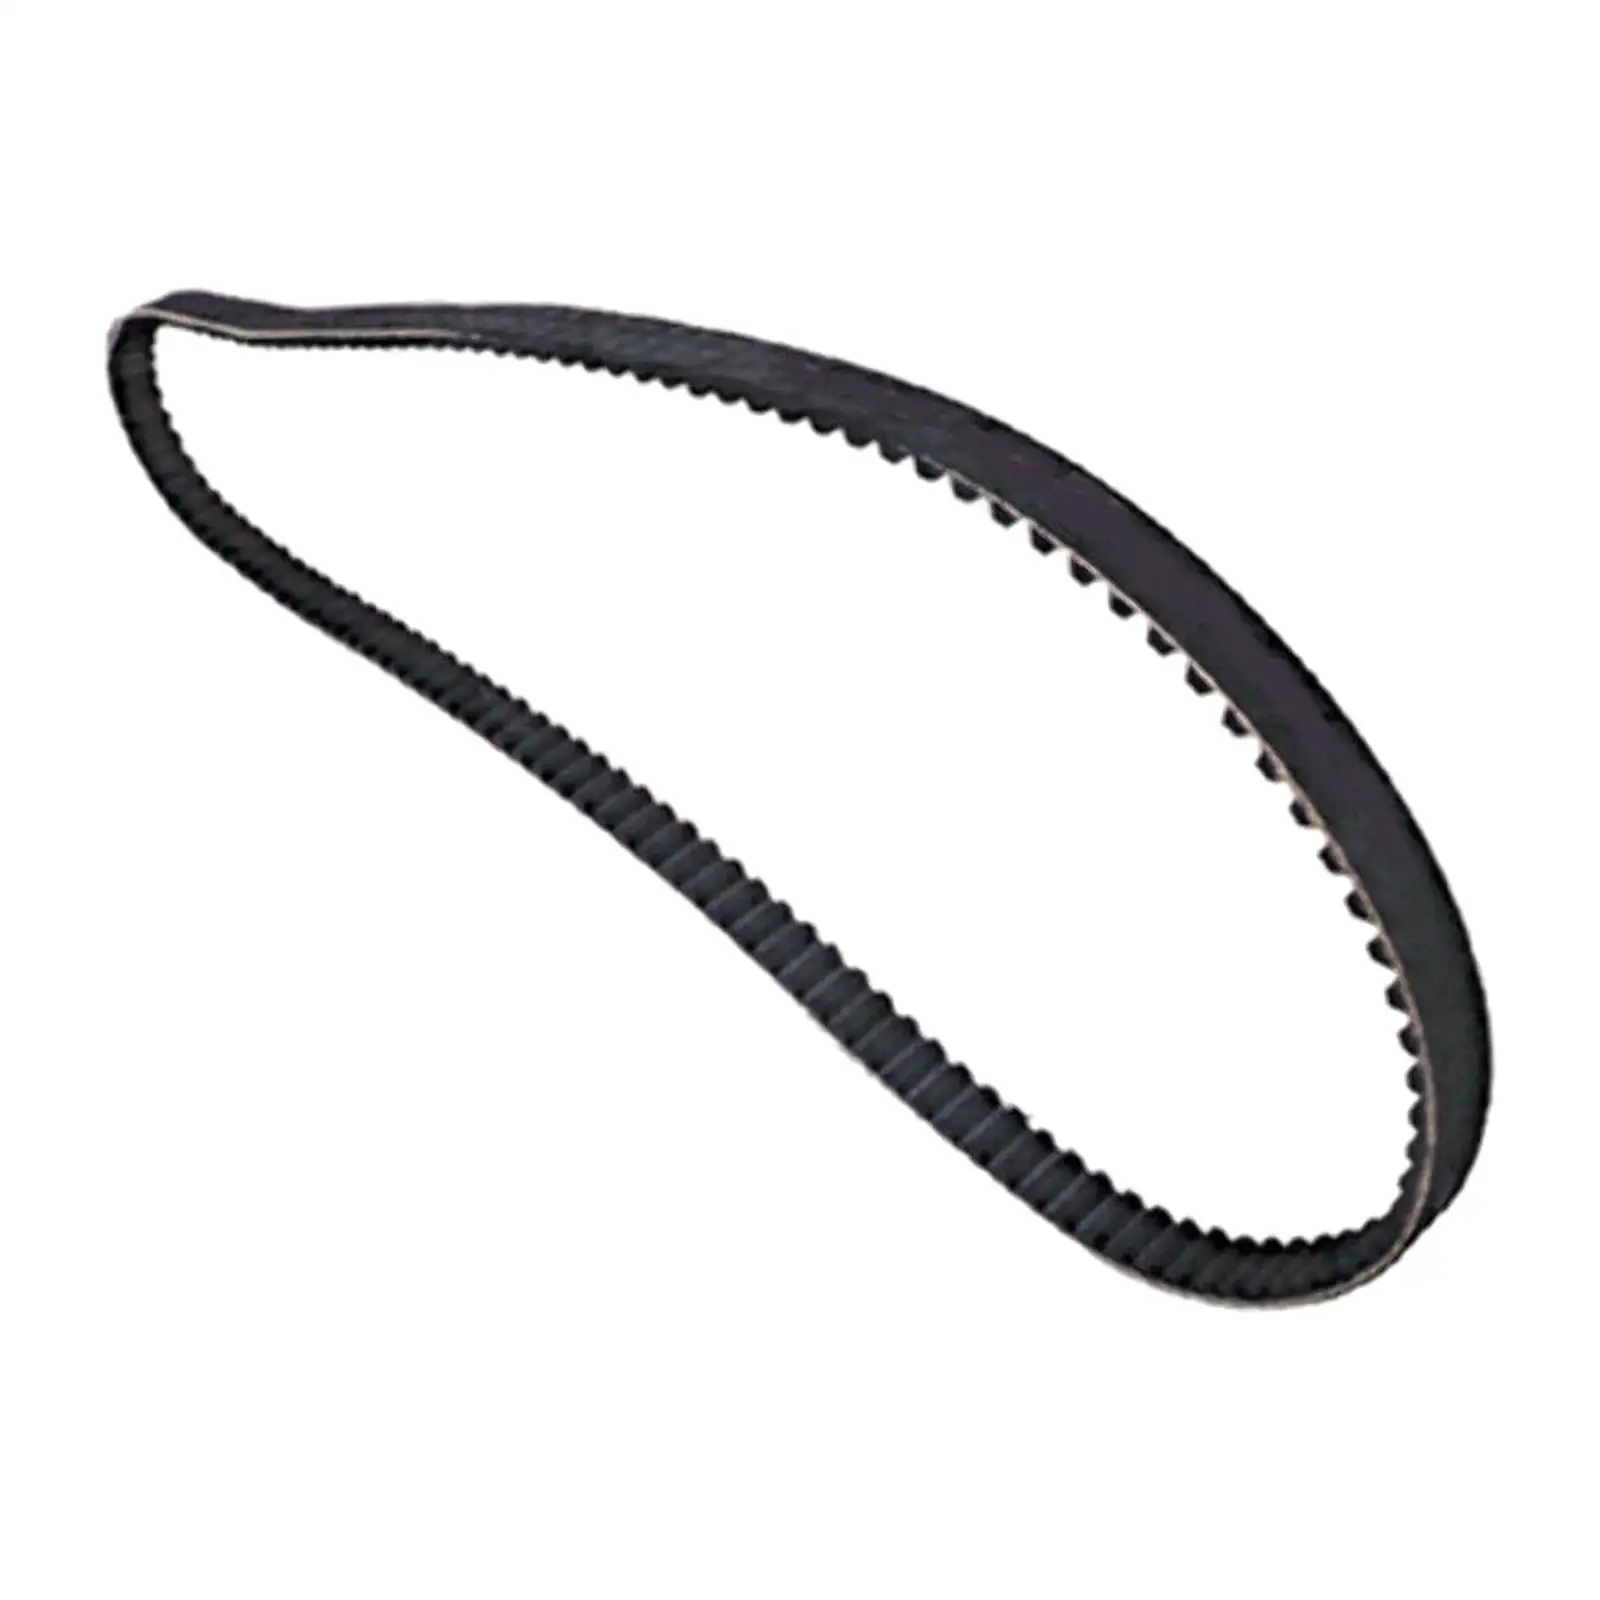 Rear Drive Belt 133 Tooth 1 1/8